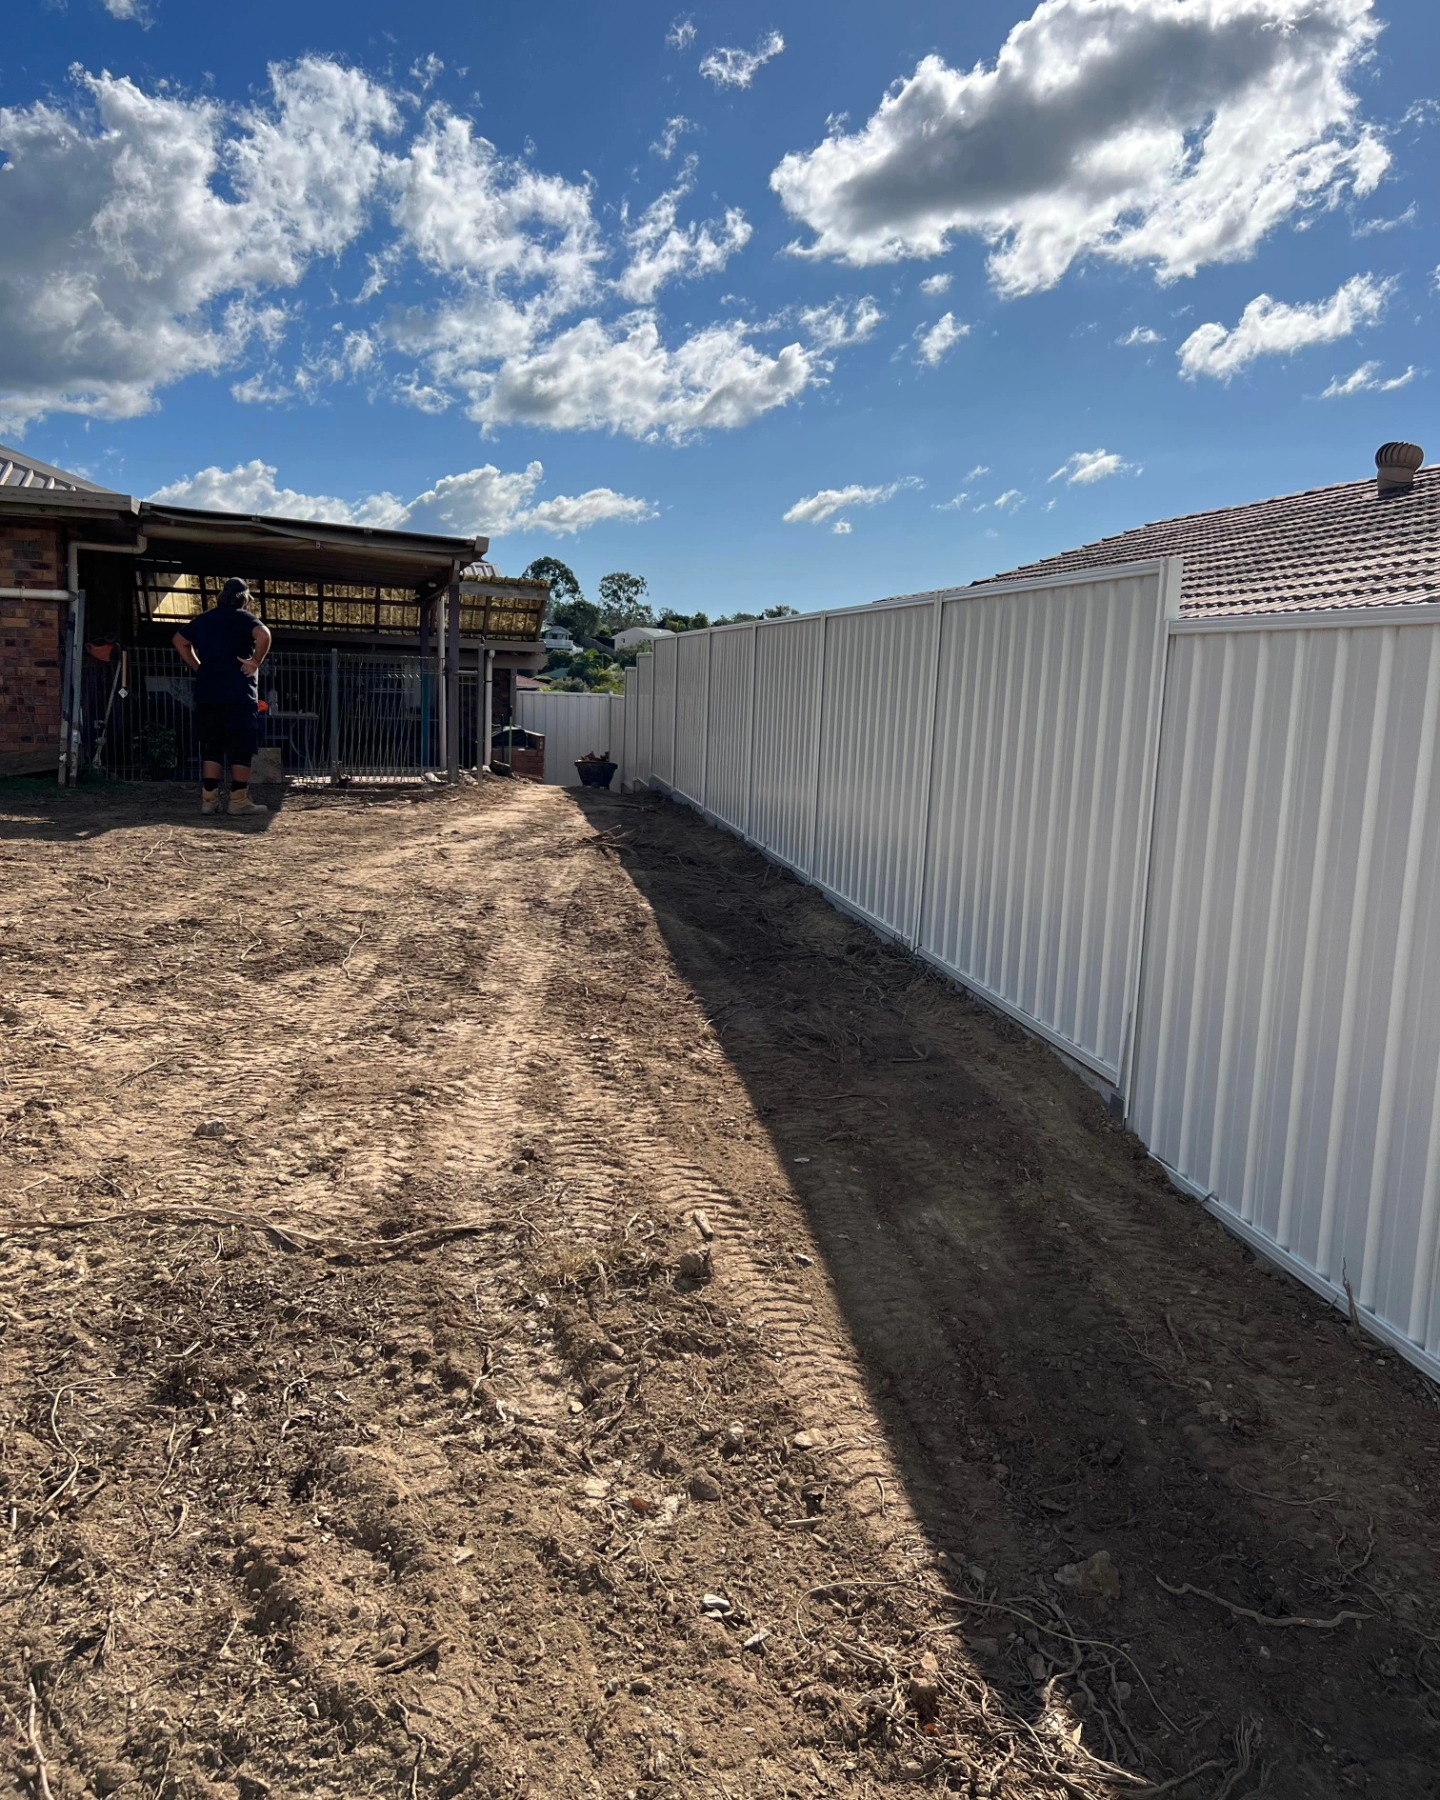 Beginning the Journey
The construction of a “Retaining Wall Colorbond Fence” starts with site preparation. This initial phase is the cornerstone of the project. It’s a task that requires meticulous attention to detail.